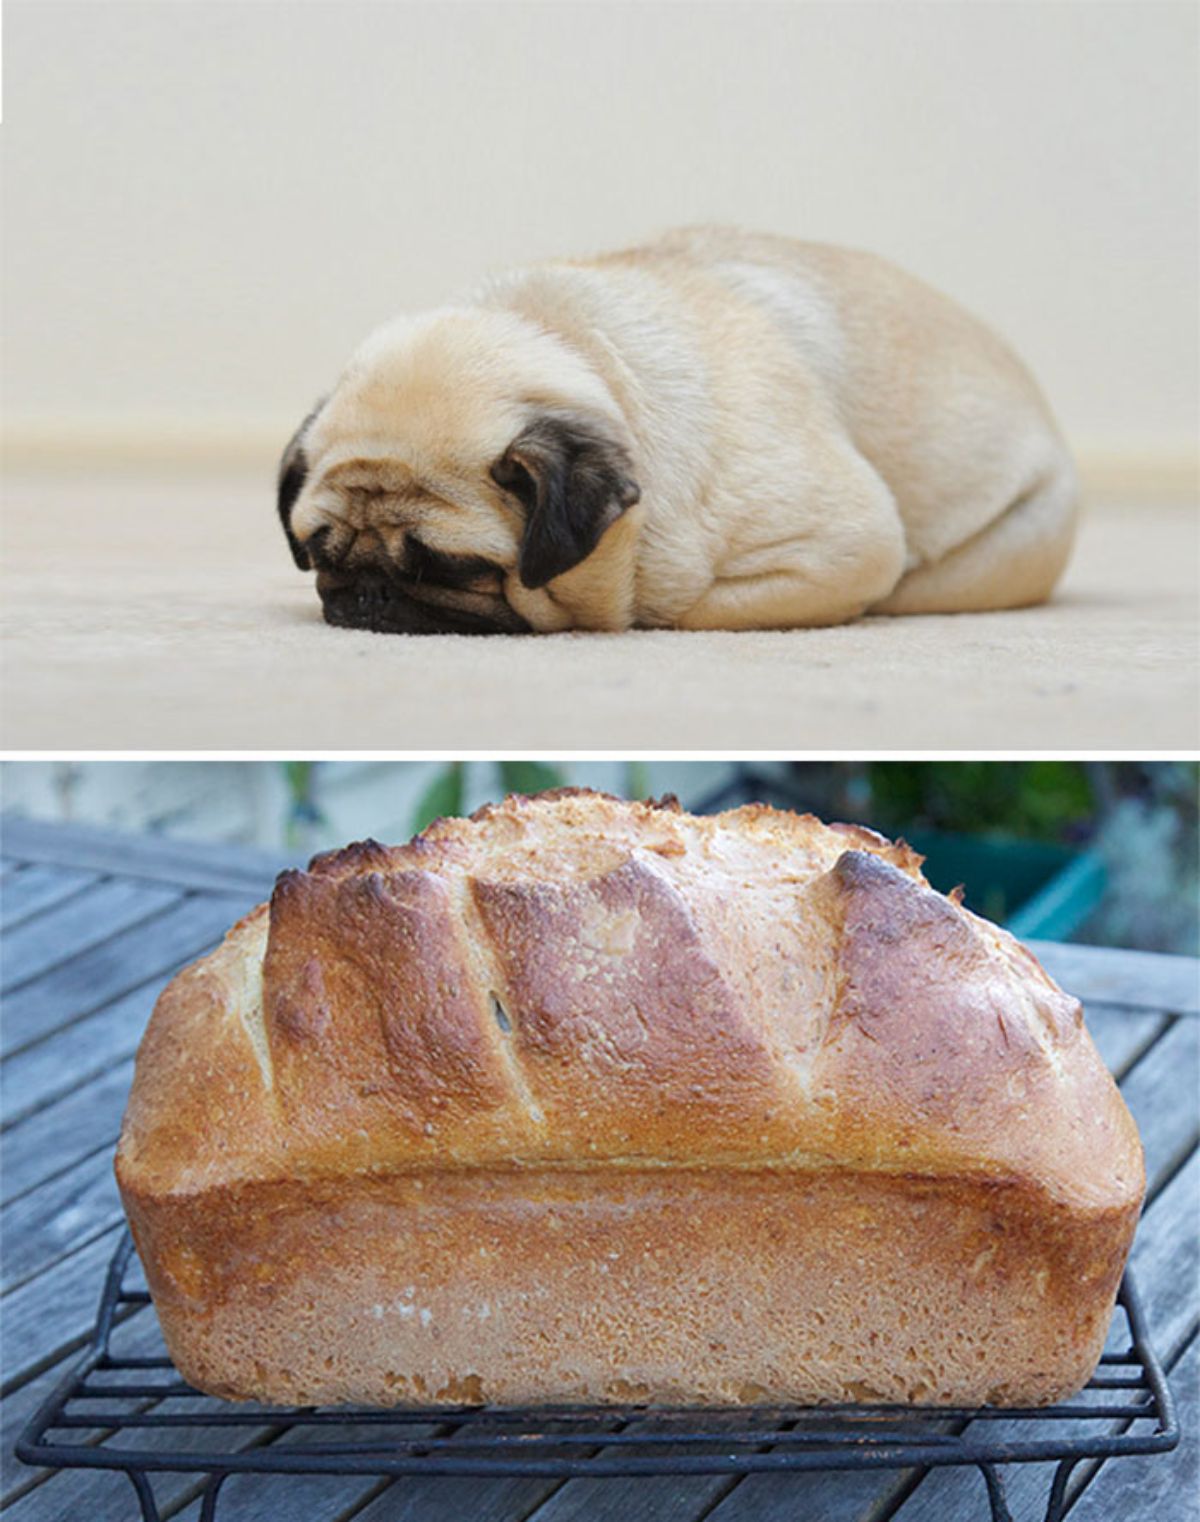 1 photo of a brown pug and 1 photo of a loaf of bread